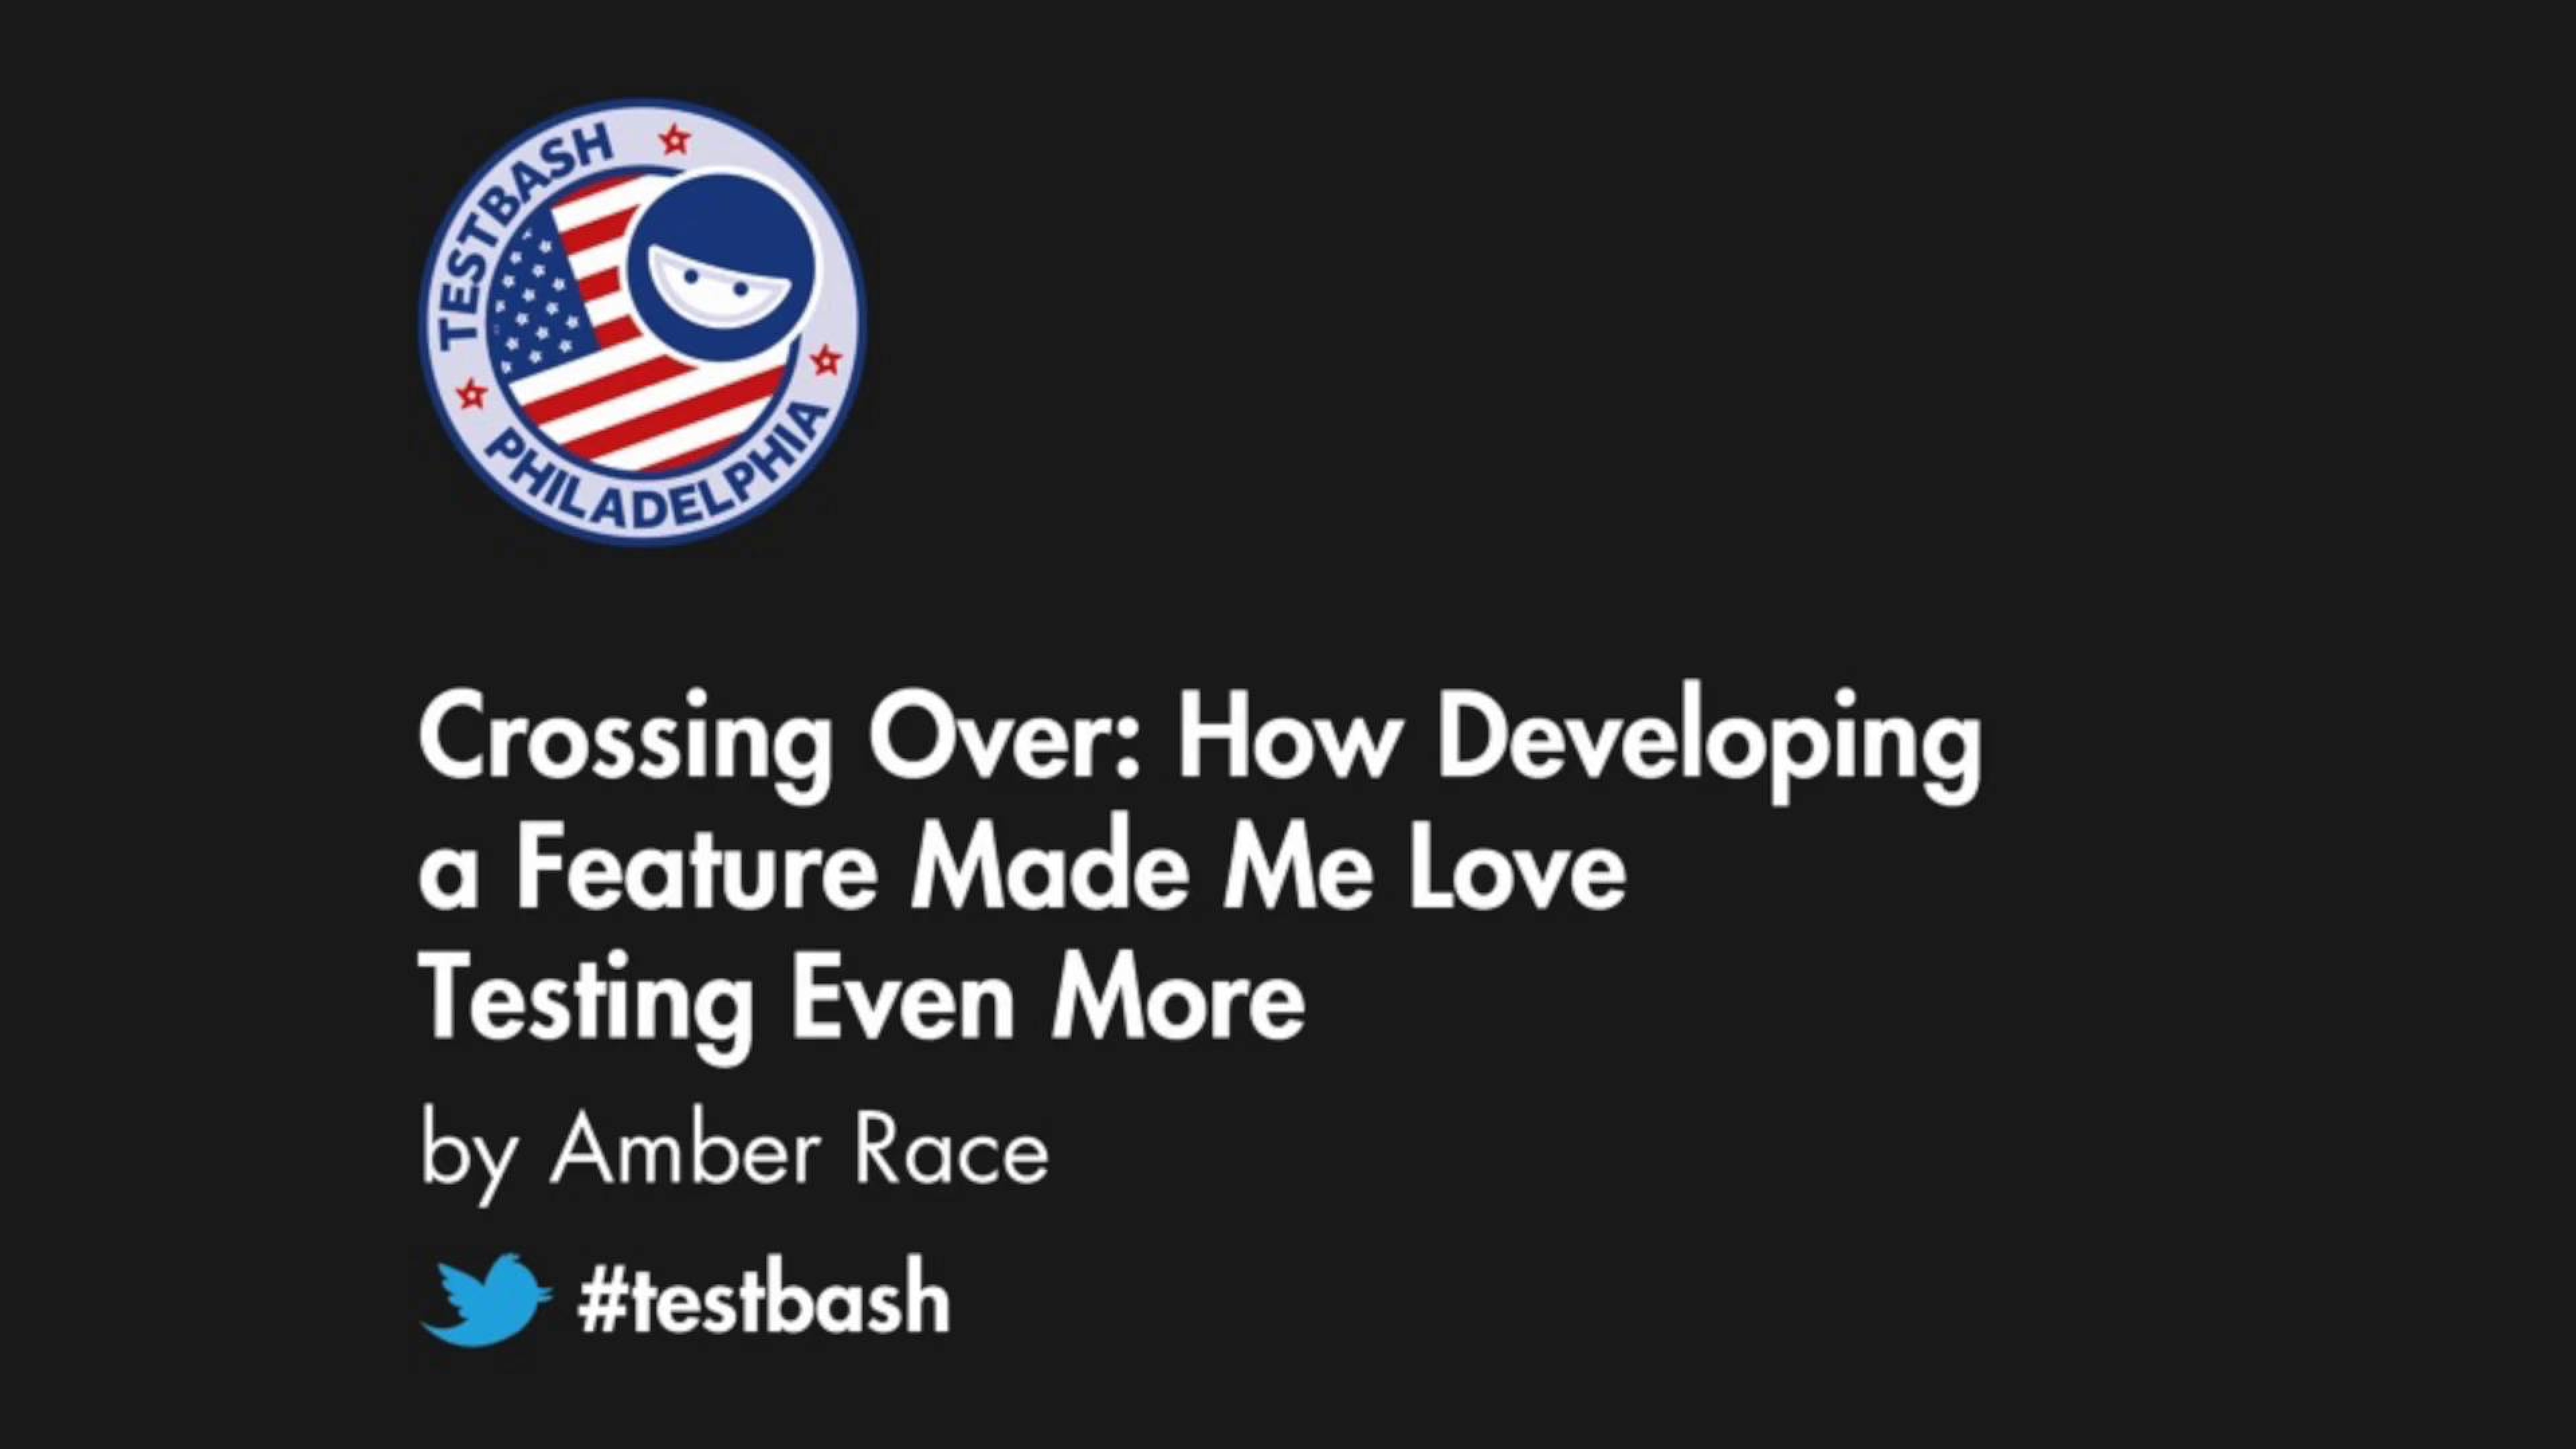 Crossing Over: How Developing a Feature Made Me Love Testing Even More - Amber Race